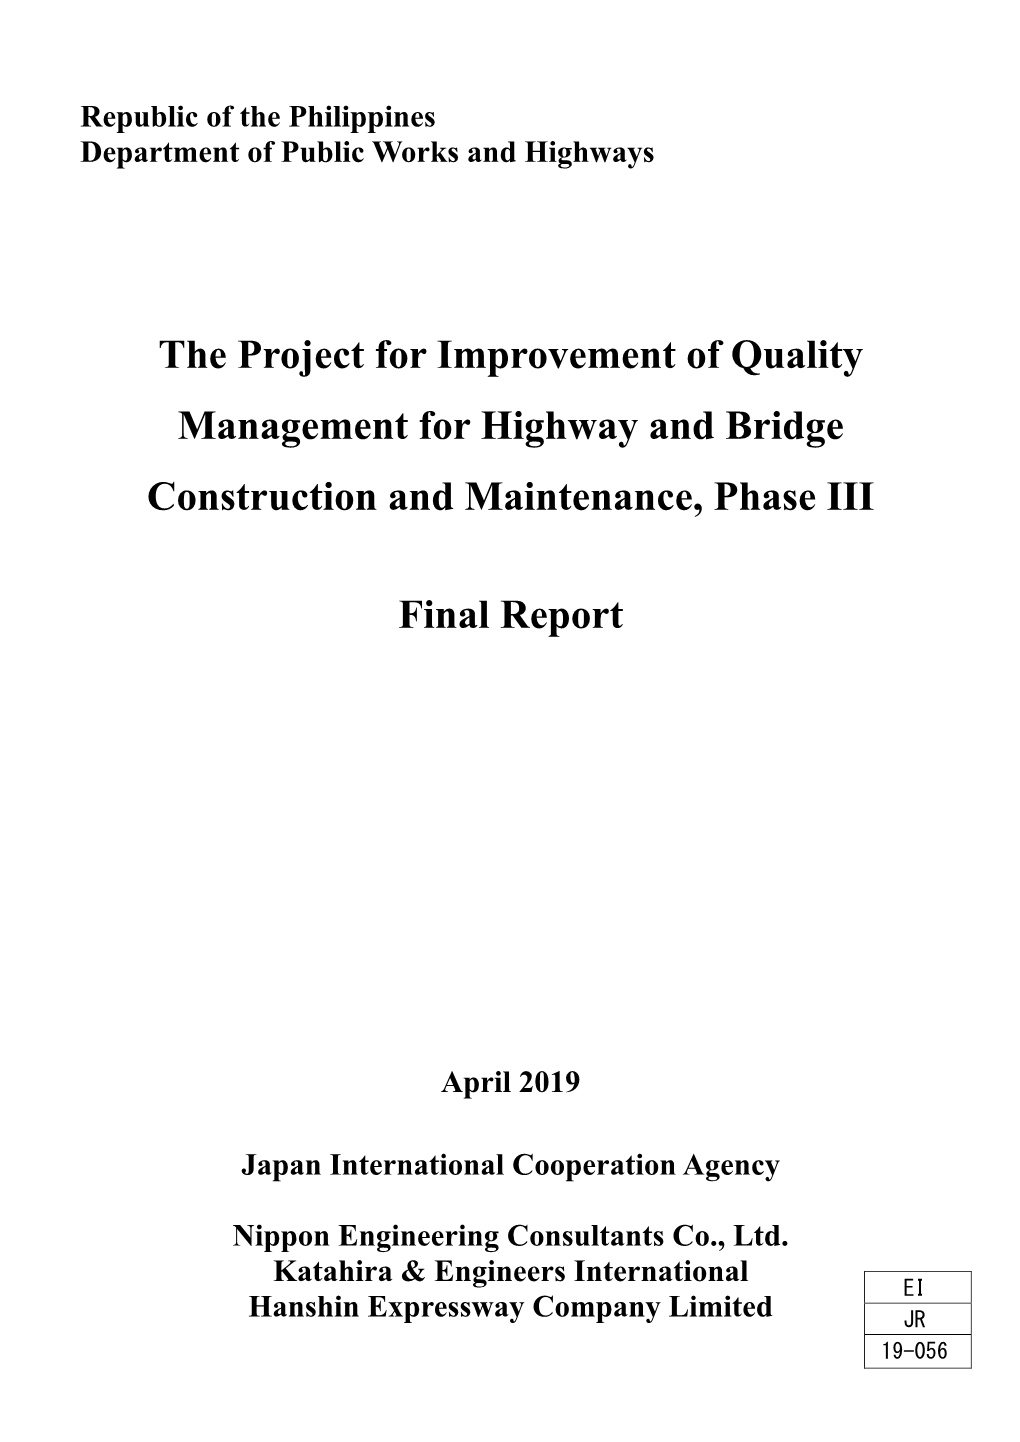 The Project for Improvement of Quality Management for Highway and Bridge Construction and Maintenance, Phase III